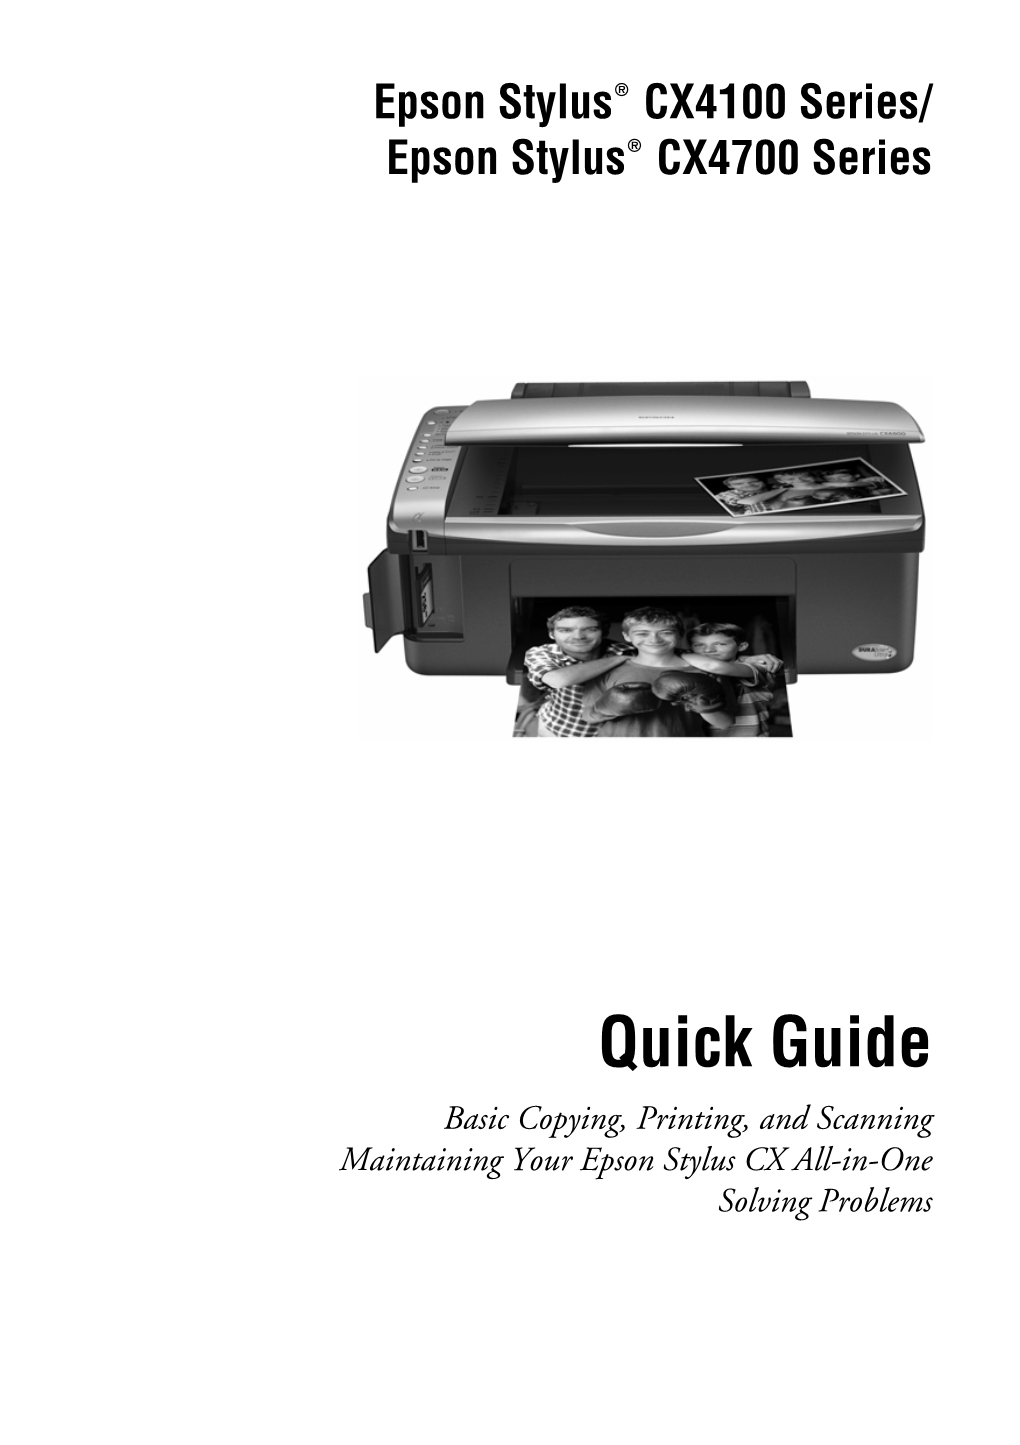 Quick Guide Basic Copying, Printing, and Scanning Maintaining Your Epson Stylus CX All-In-One Solving Problems Copyright Notice All Rights Reserved